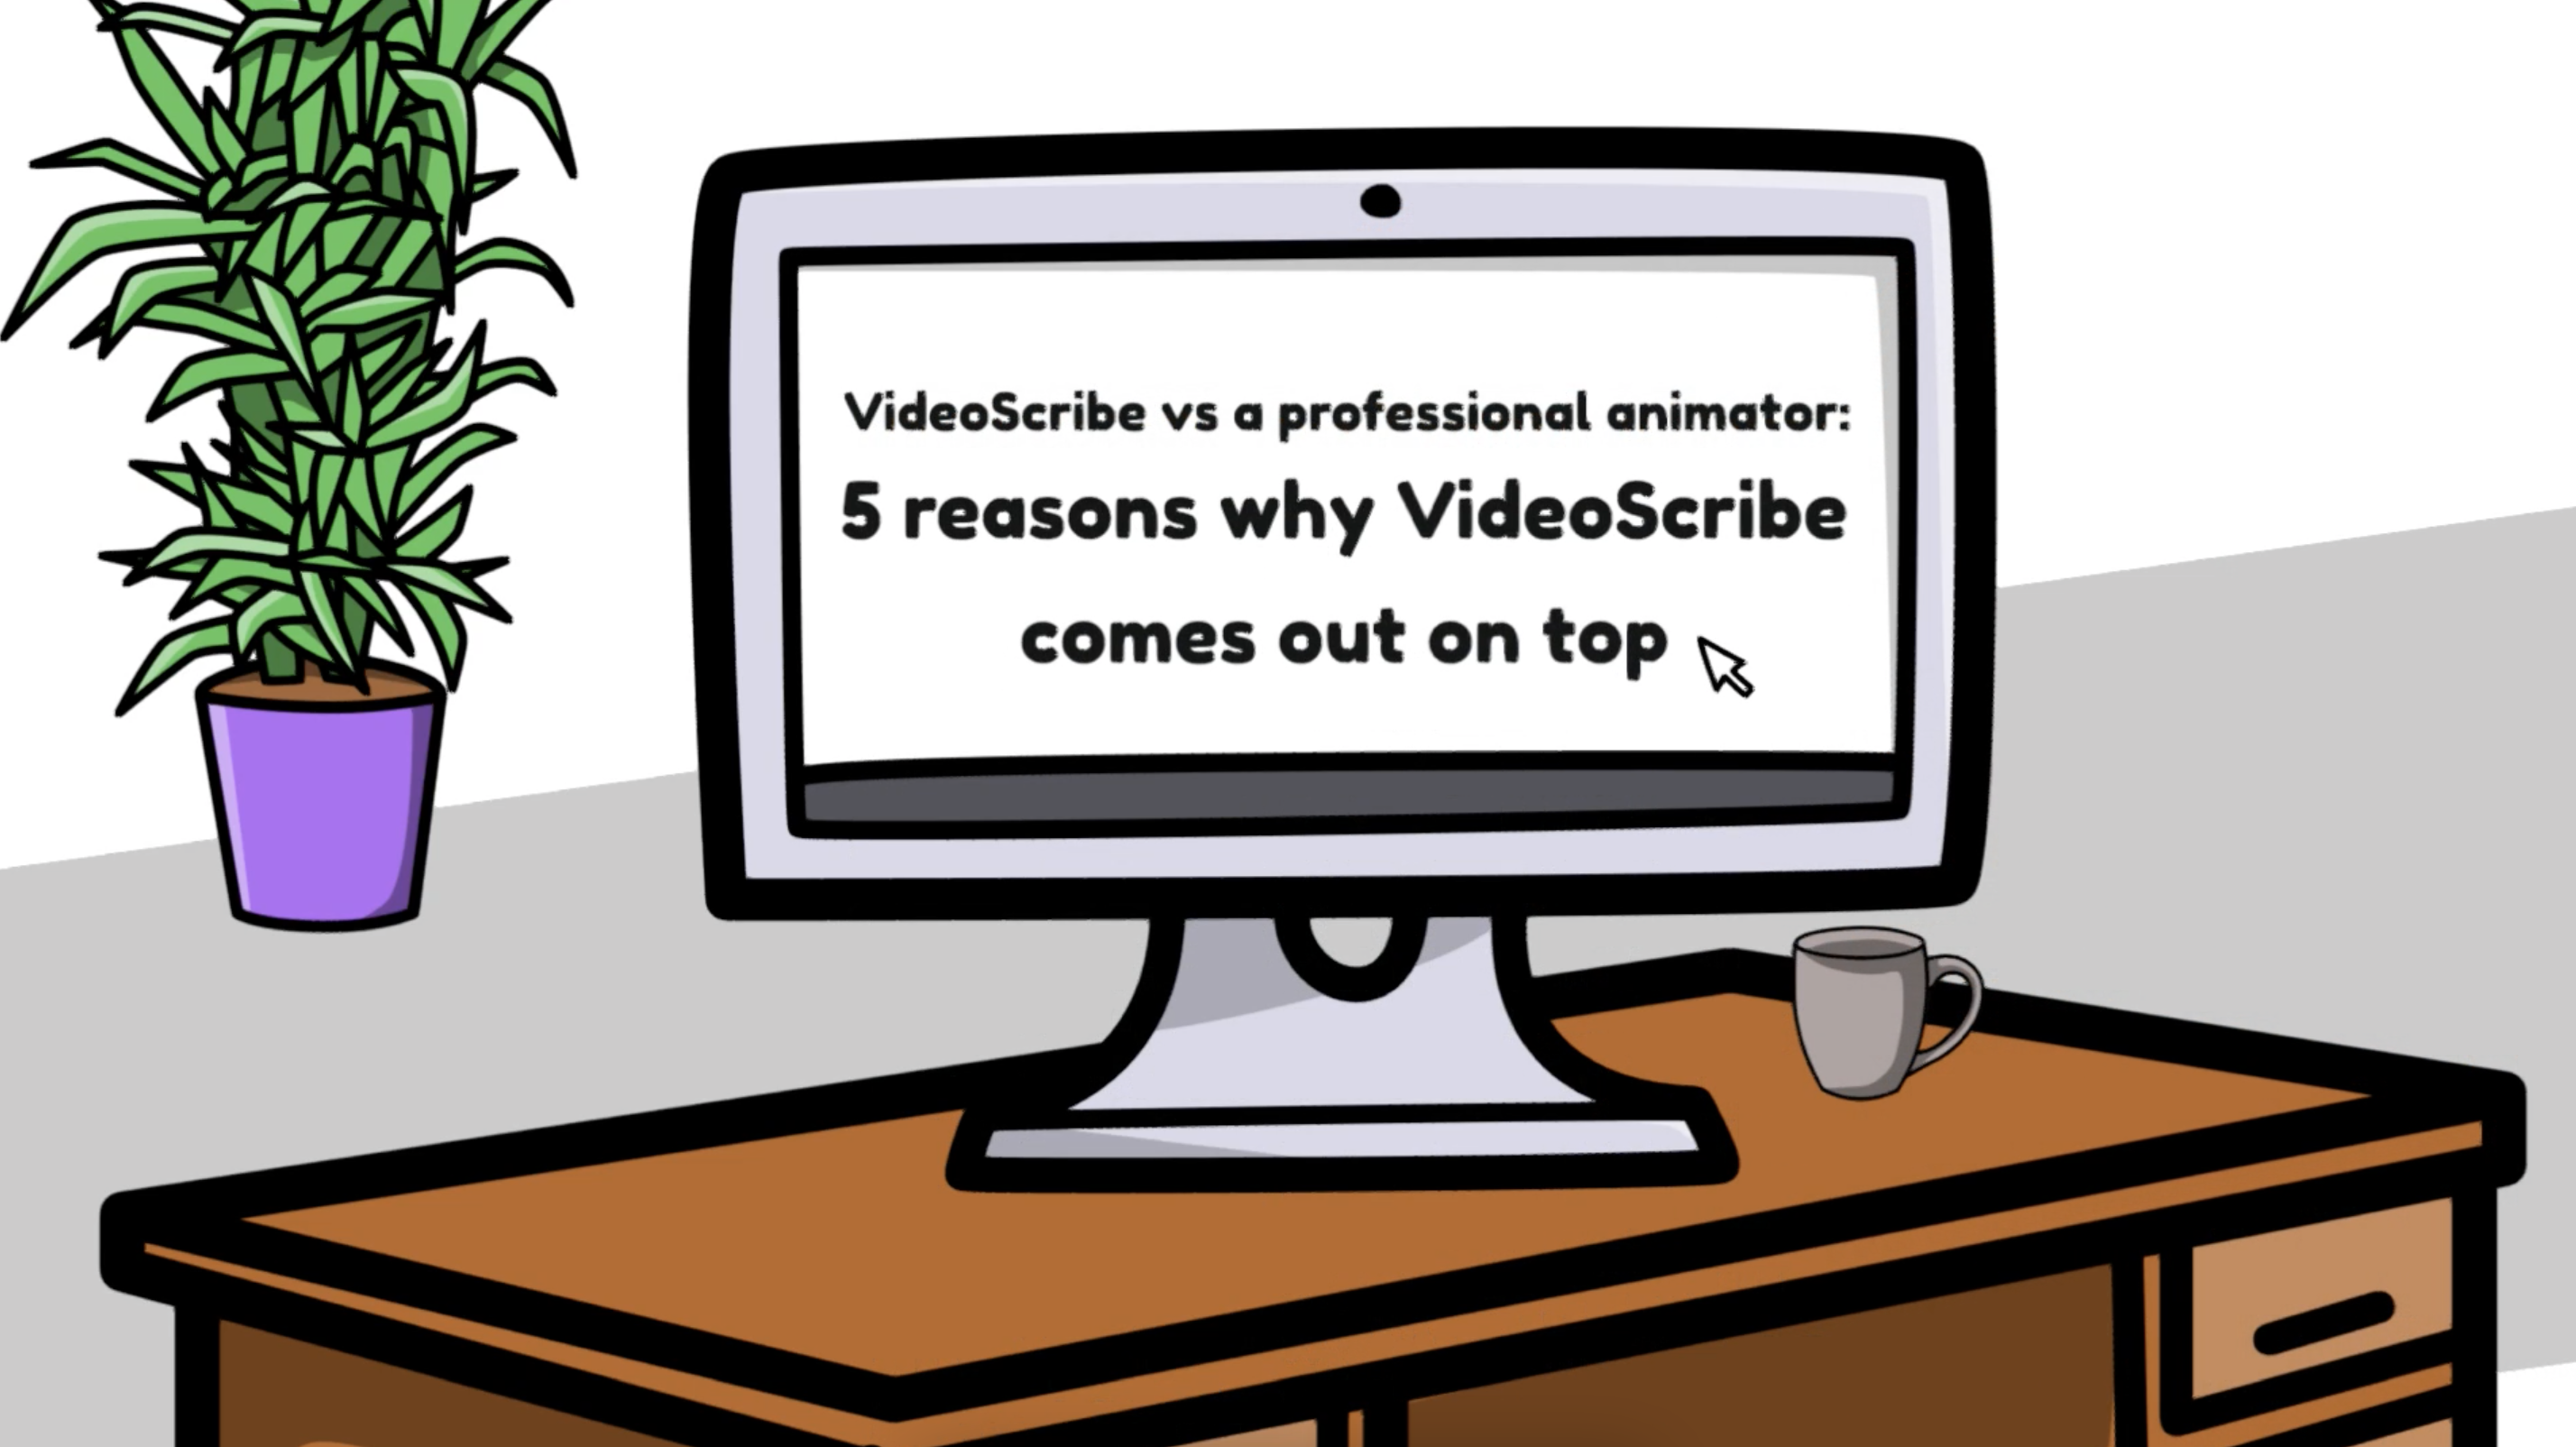 VideoScribe vs a professional animator: 5 reasons why VideoScribe comes out on top